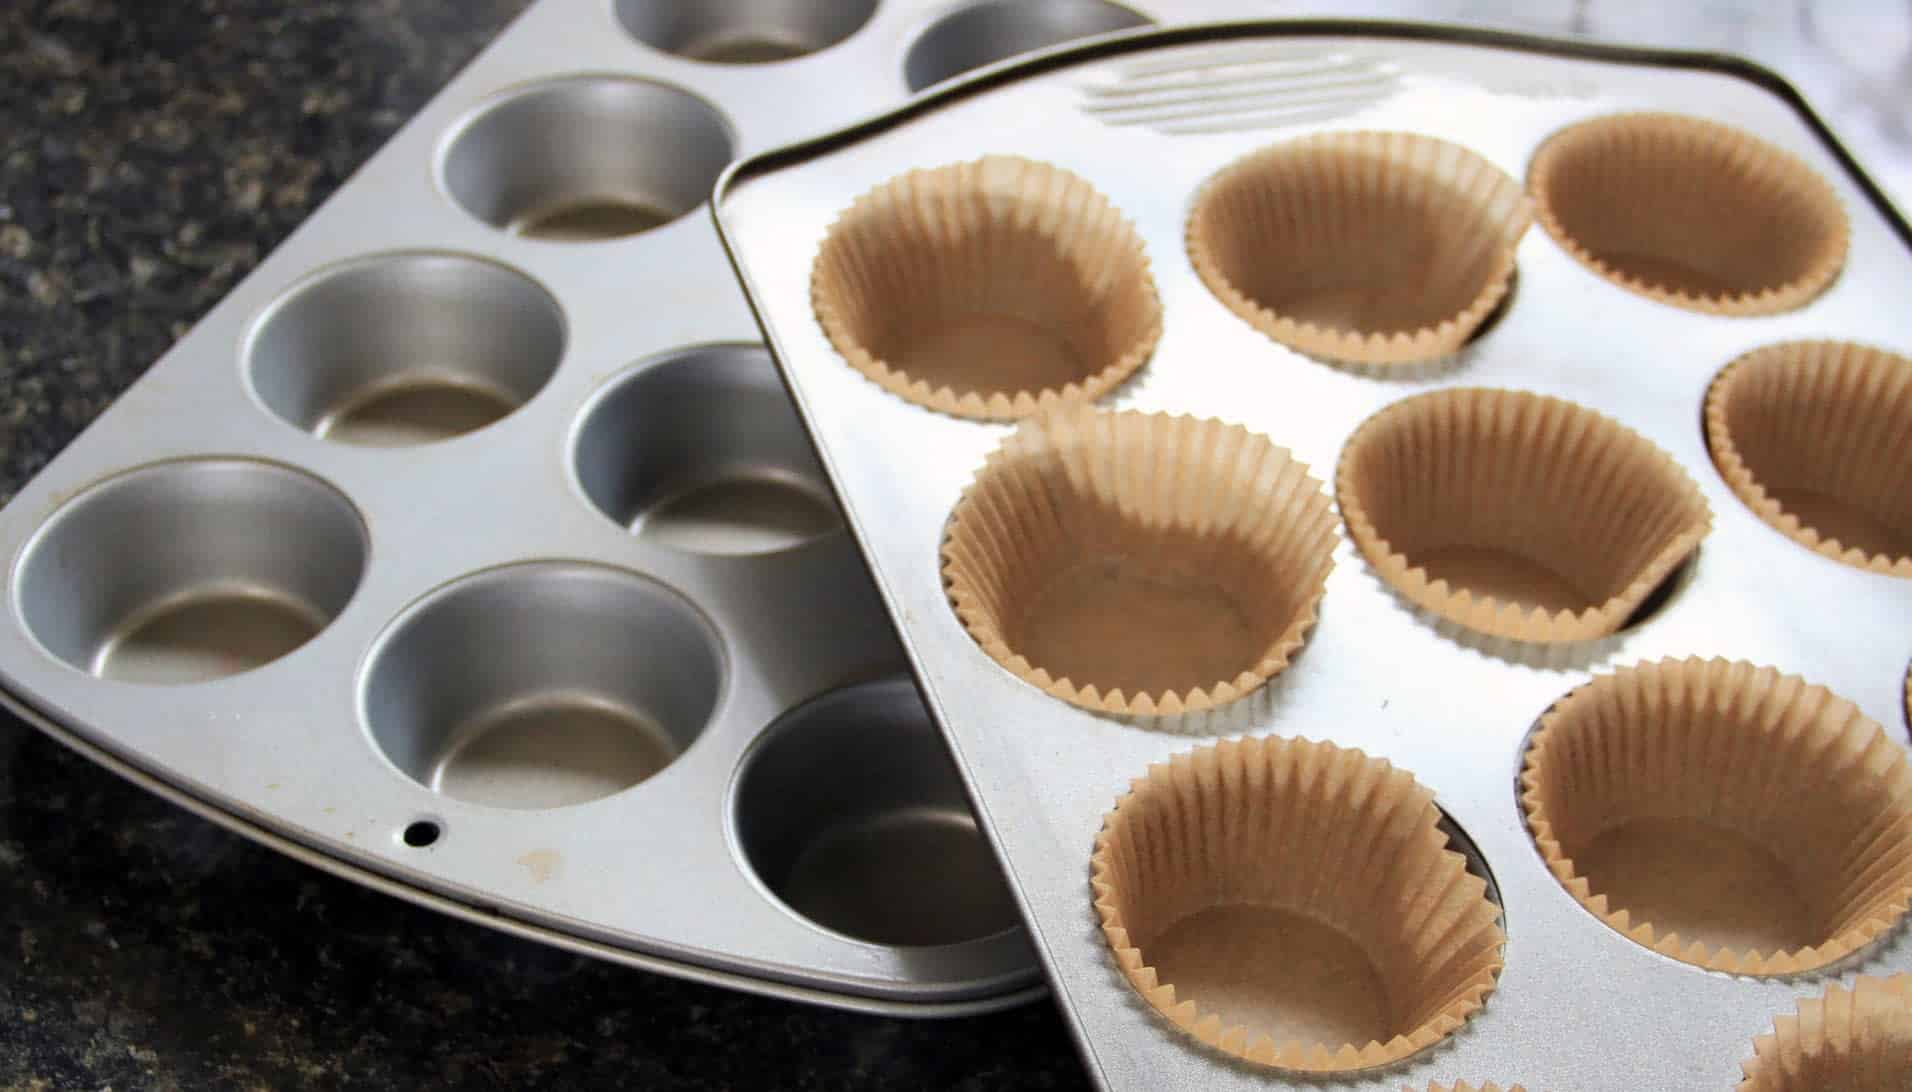 Things To Consider When Buying A Muffin Pan